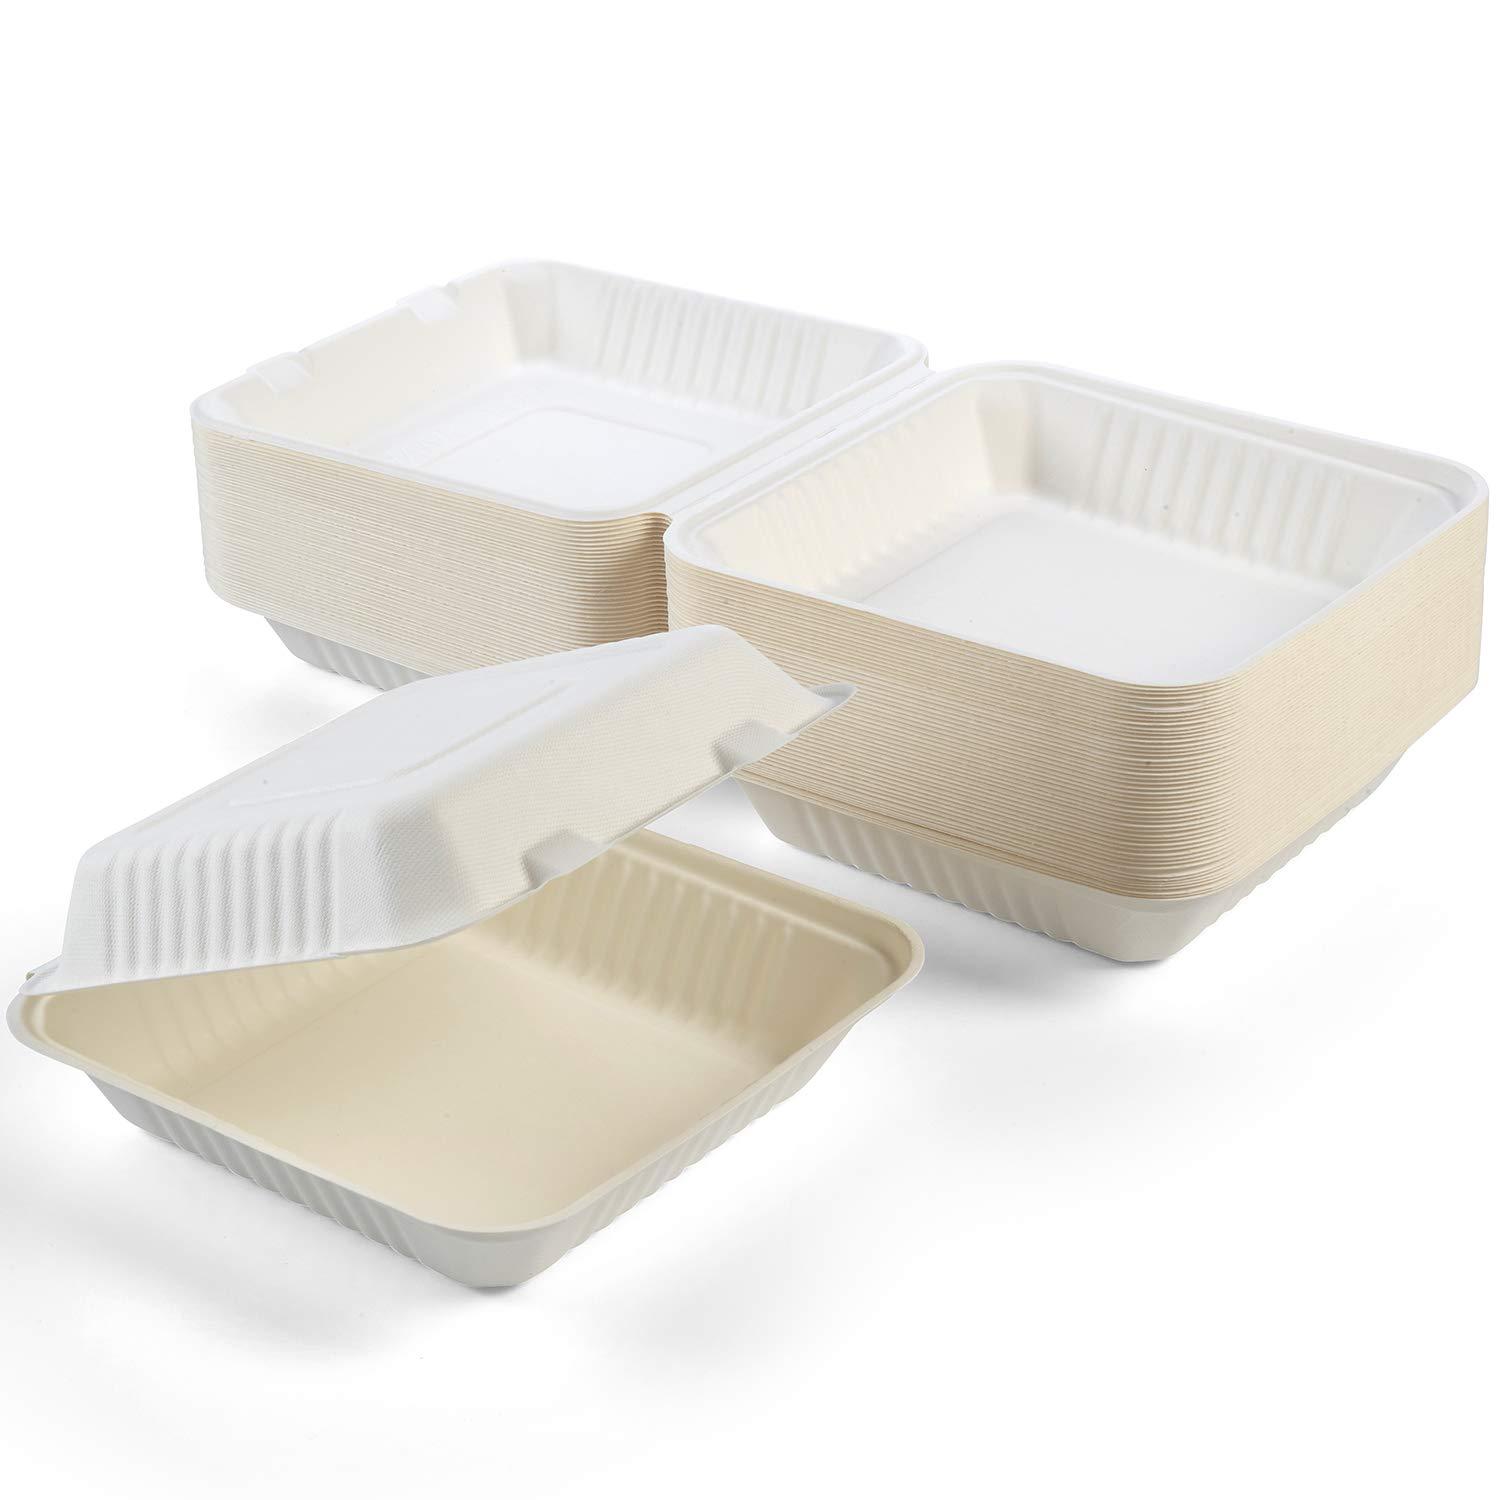  8X8 3Compartment 50-Pack Plastic Clamshell Take Out